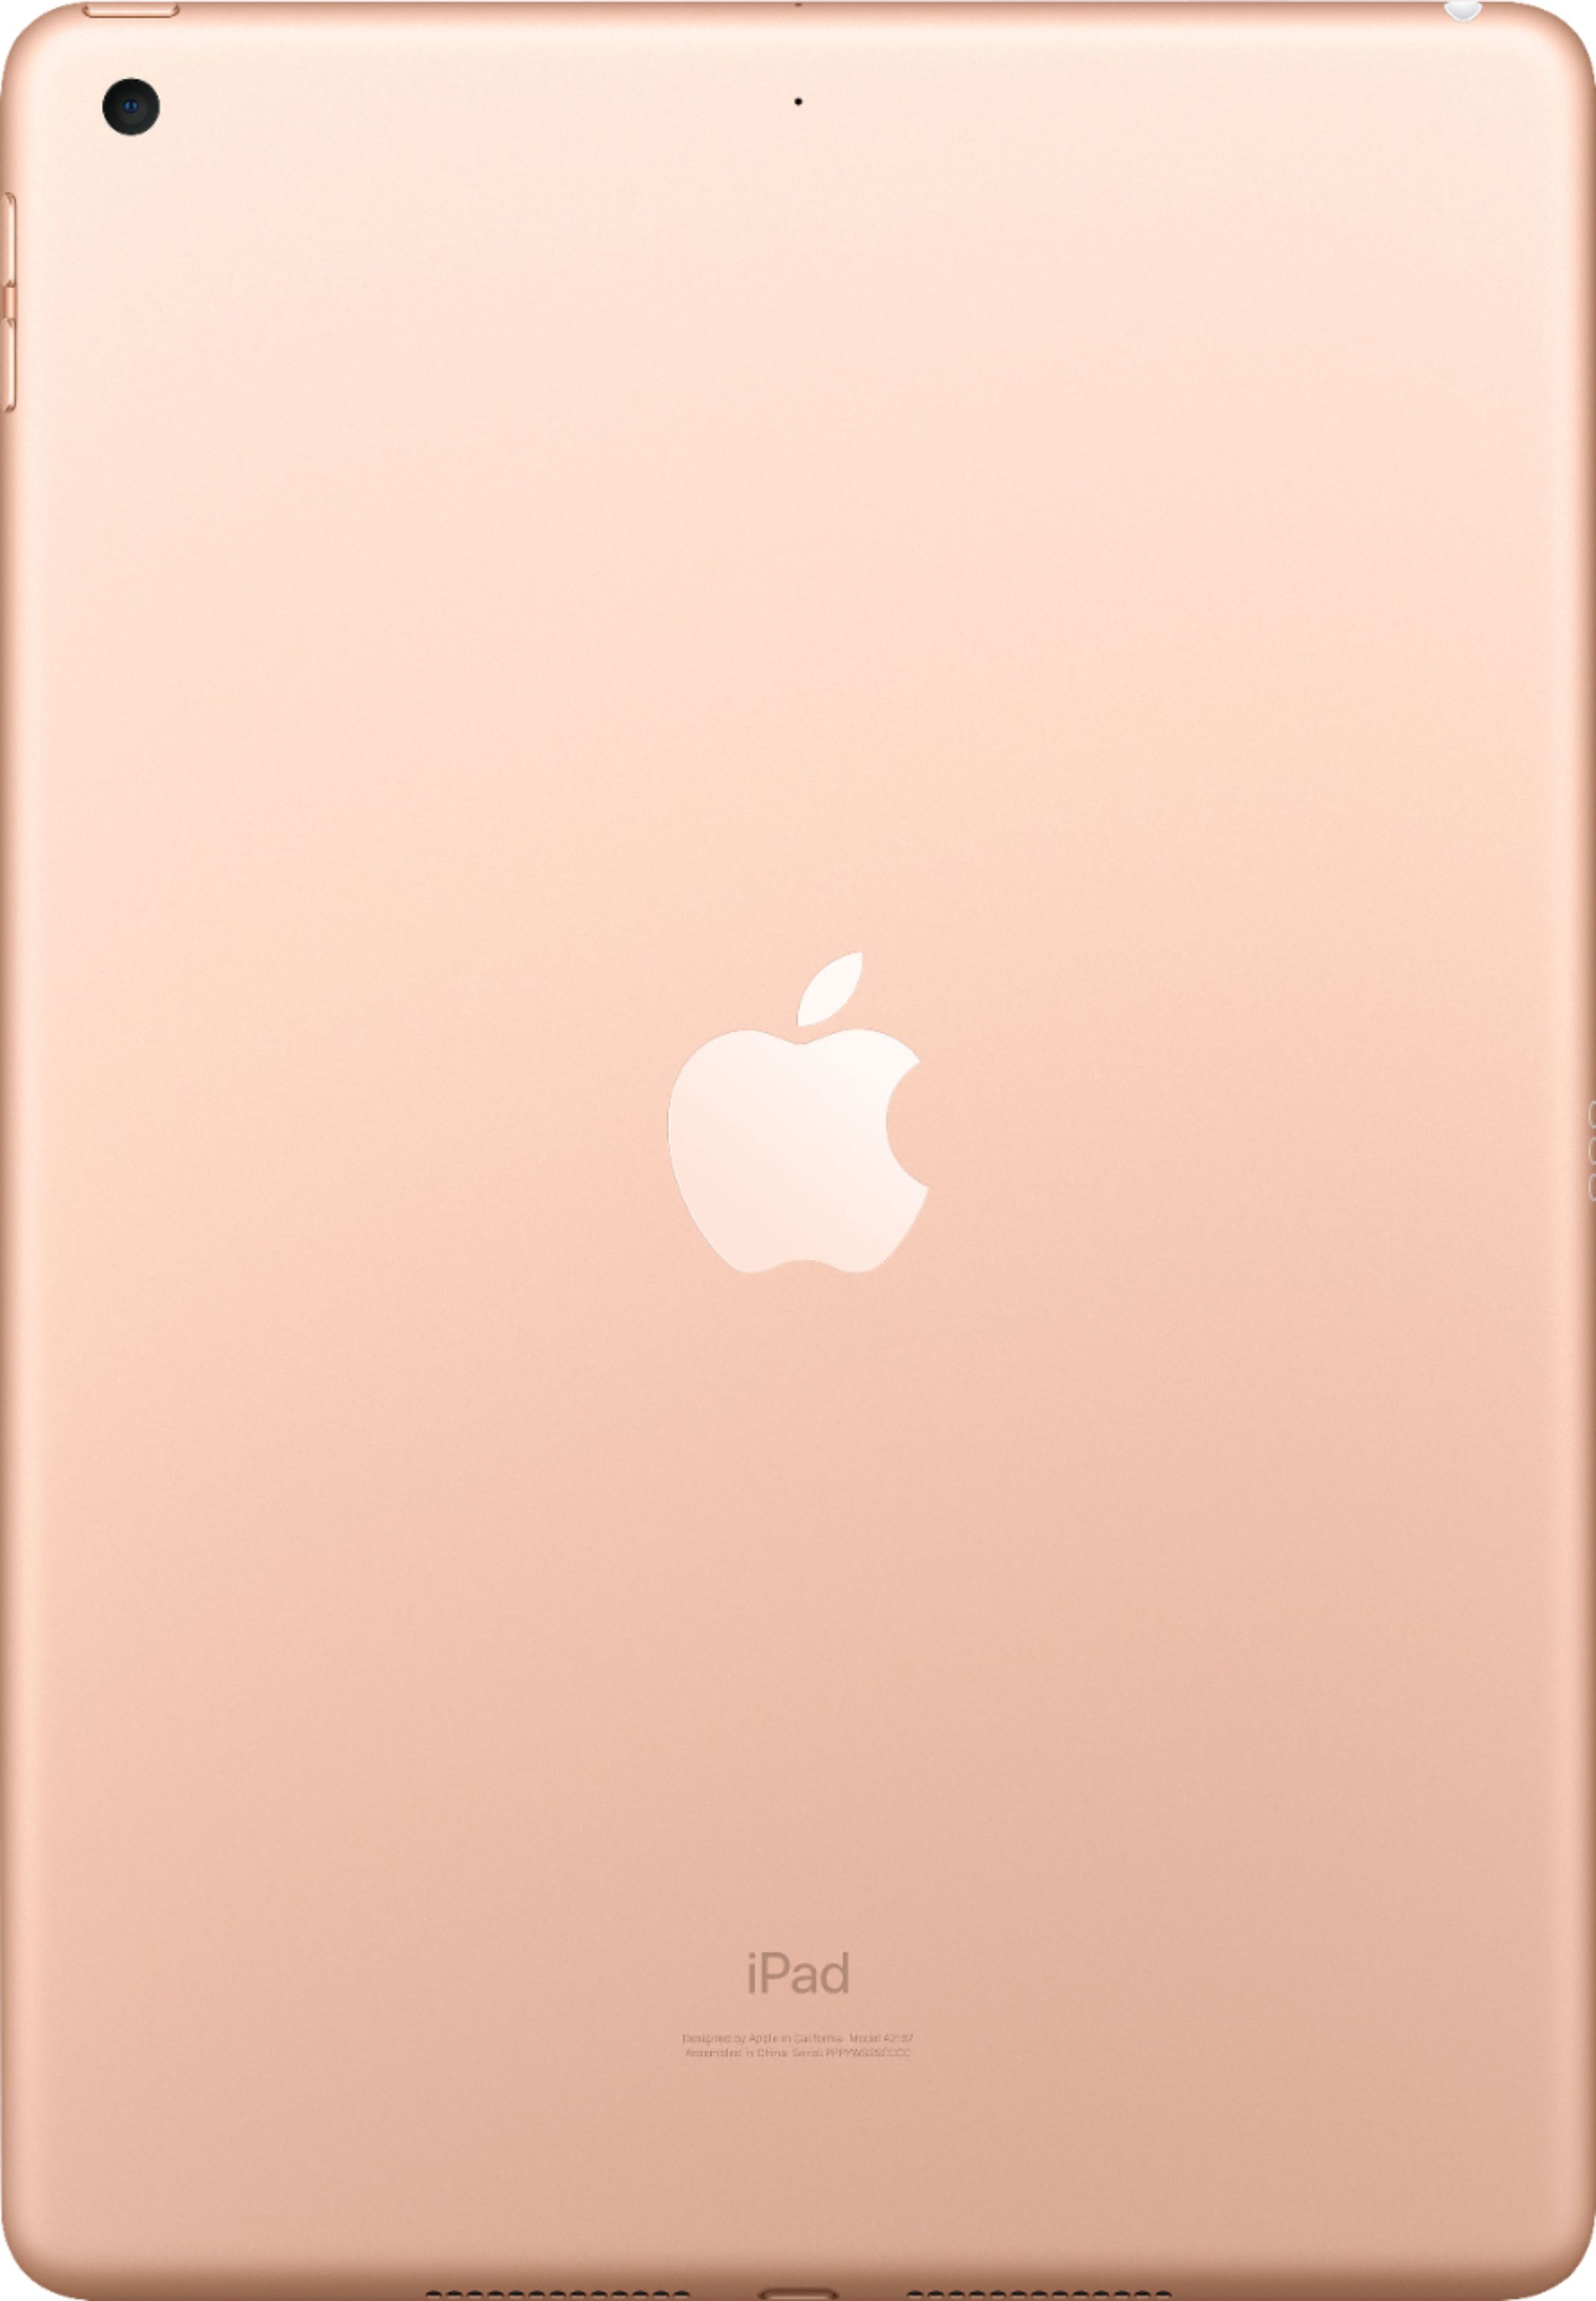 Back View: Apple - Geek Squad Certified Refurbished 10.2-Inch iPad - Latest Model - (7th Generation) with Wi-Fi - 32GB - Gold